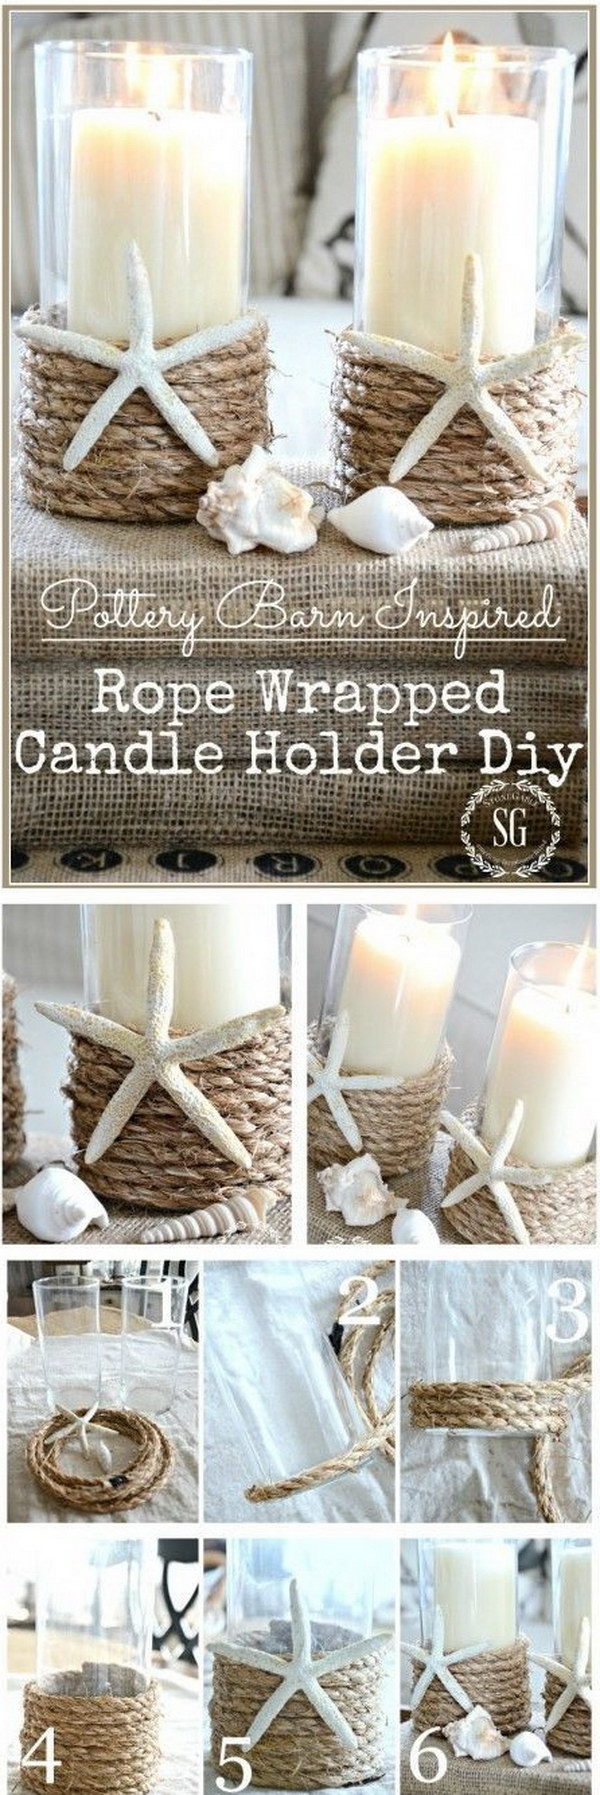 DIY Rope Wrapped Candle Holder. 